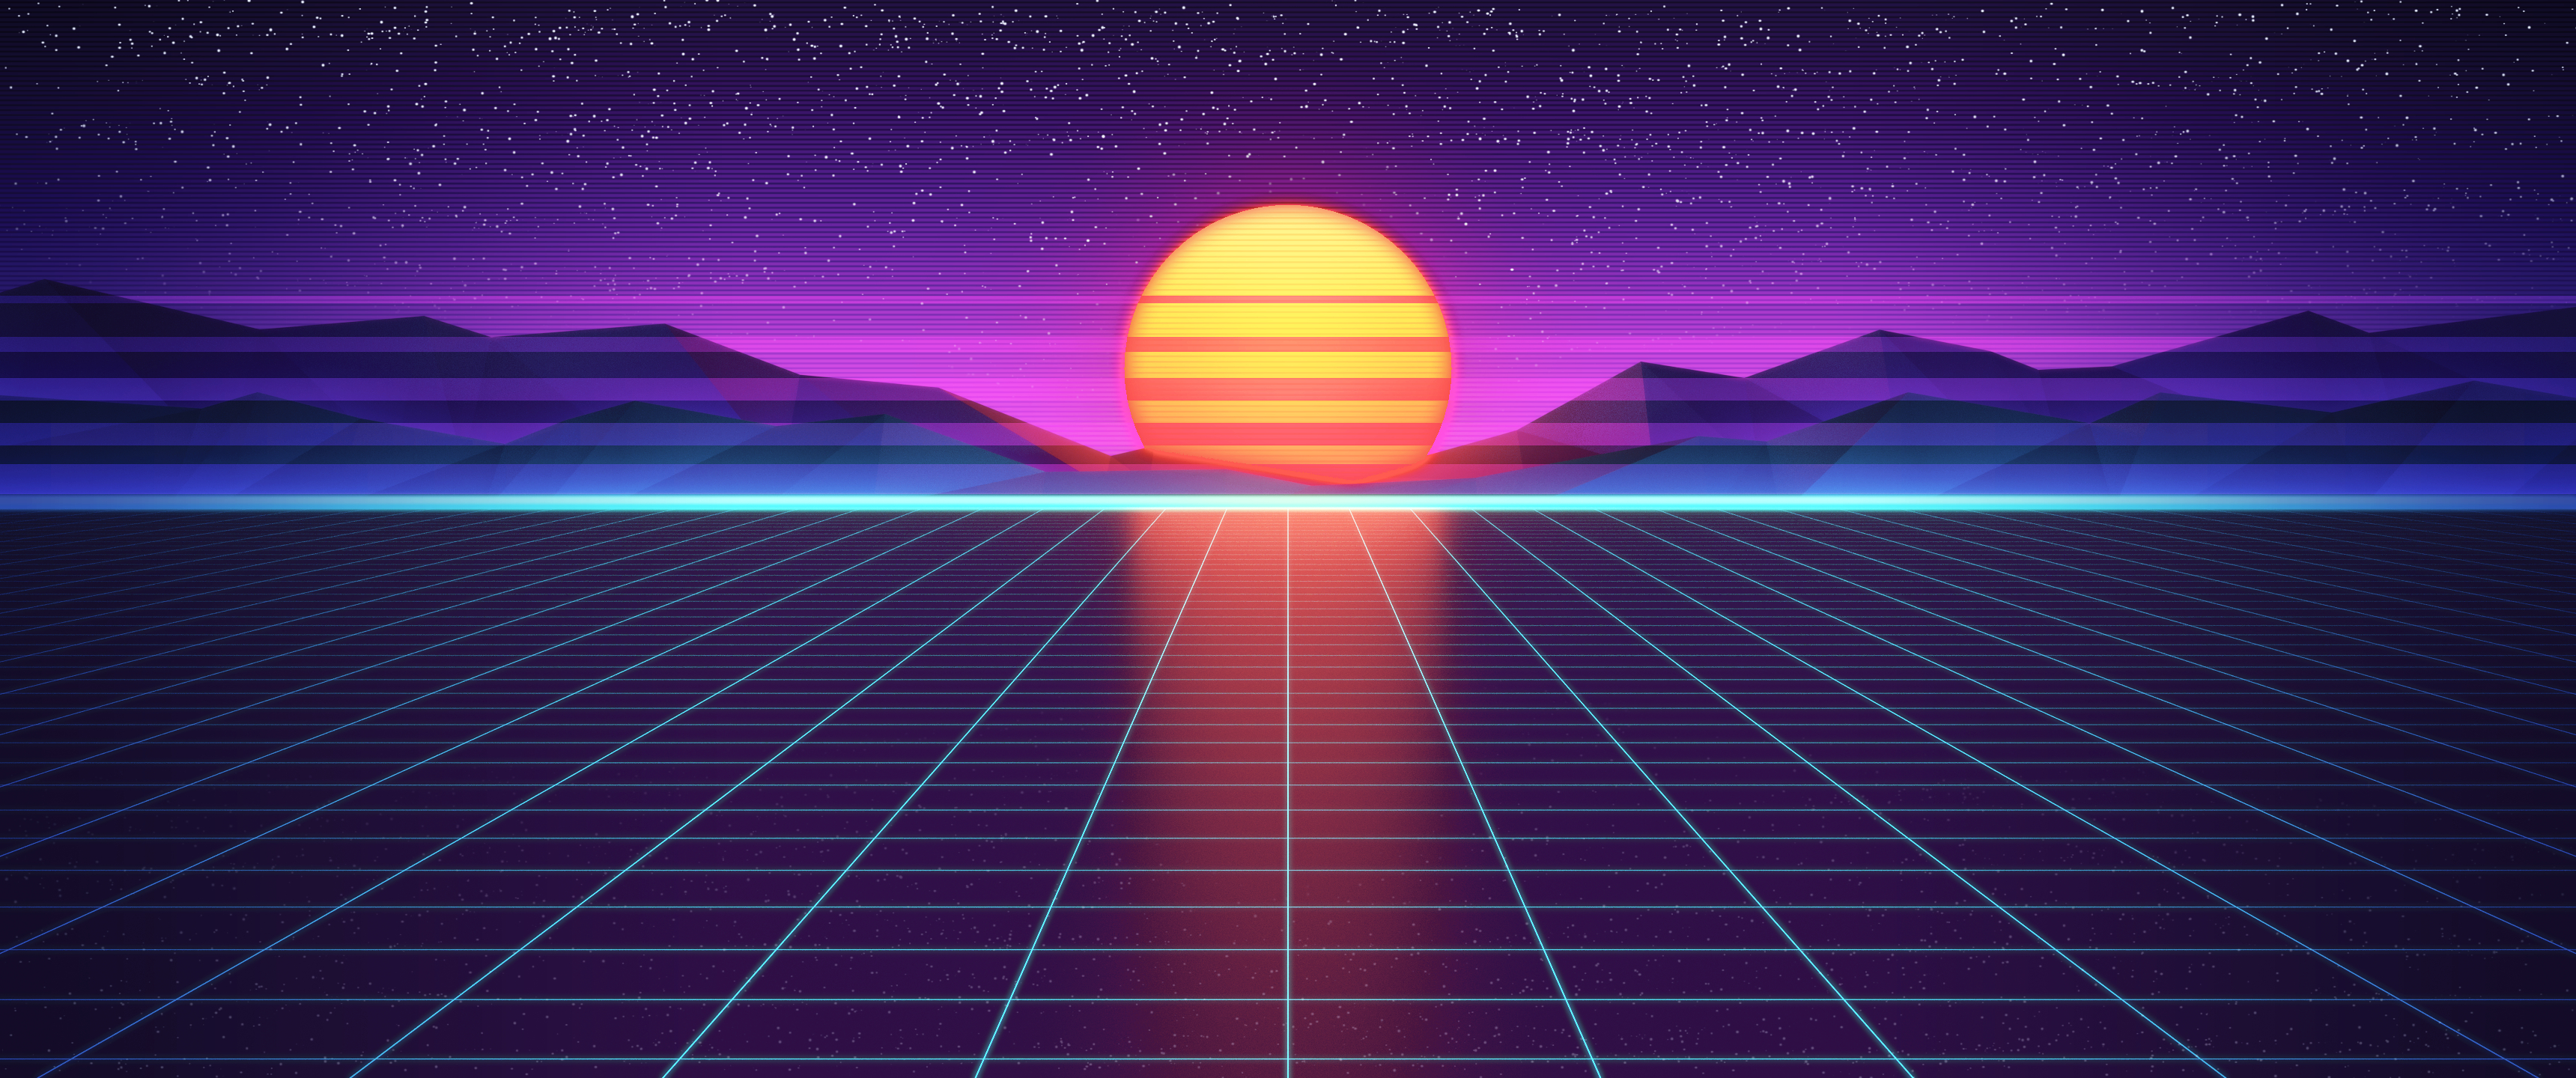 3440x1440 Retro Wallpapers Top Free Retro Backgrounds